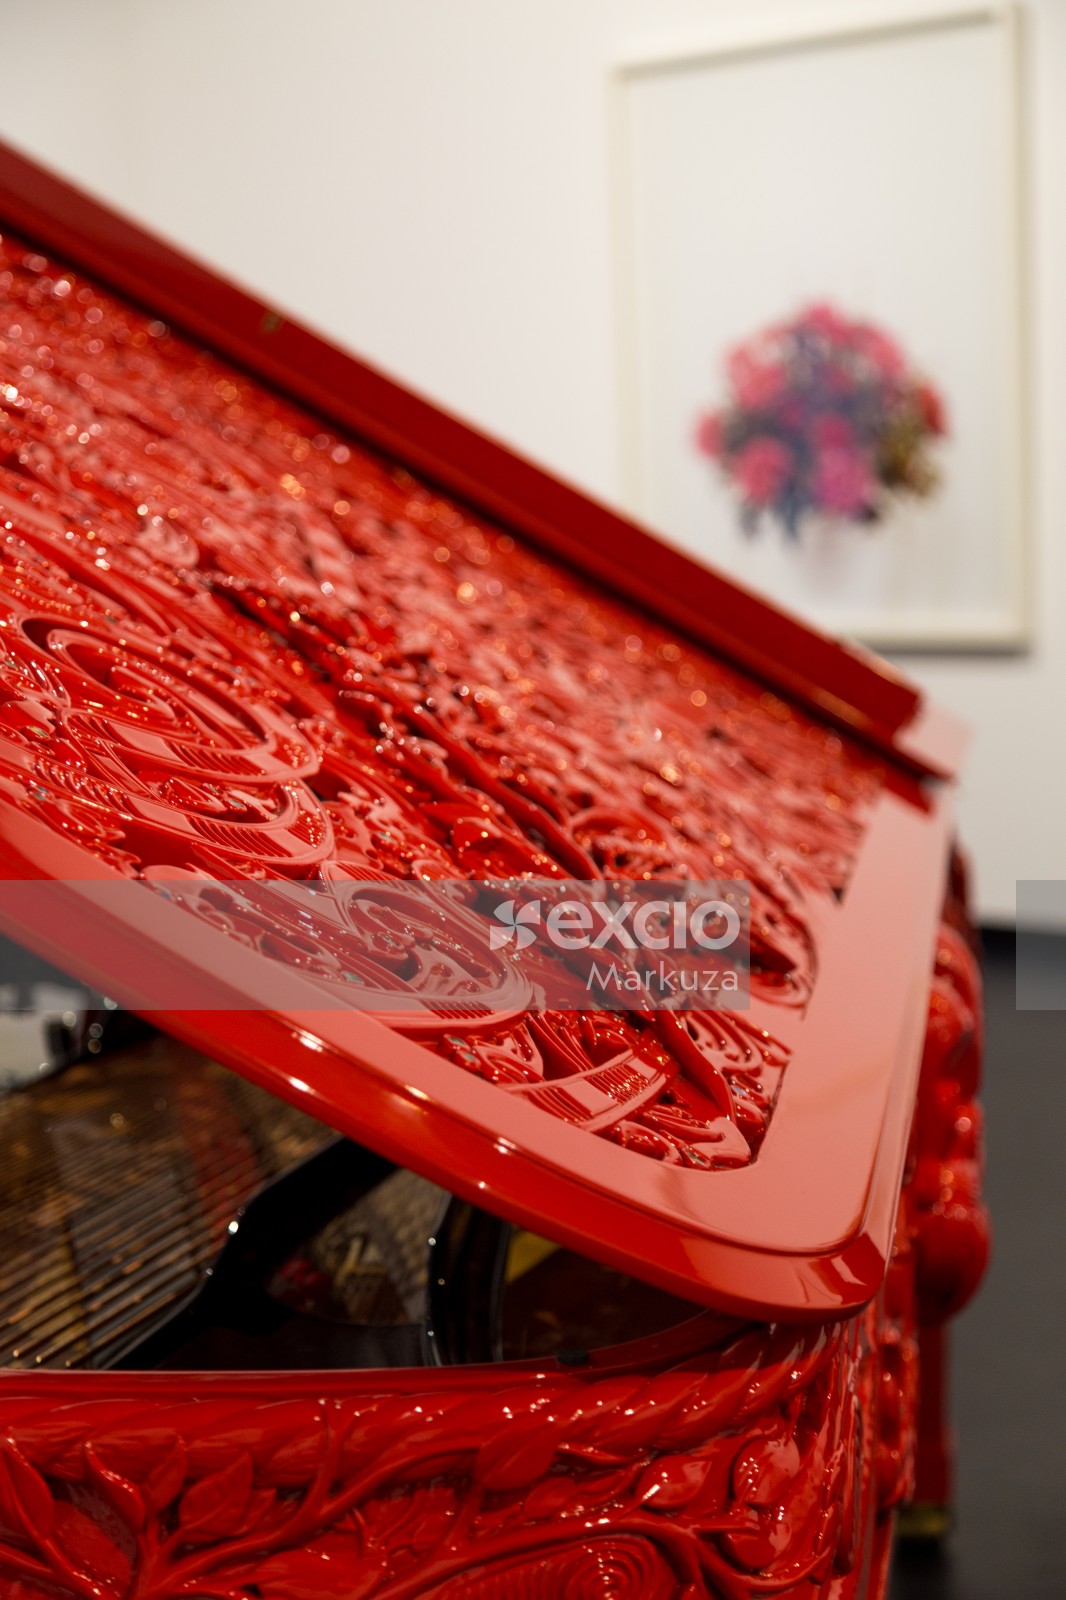 The red piano decoration